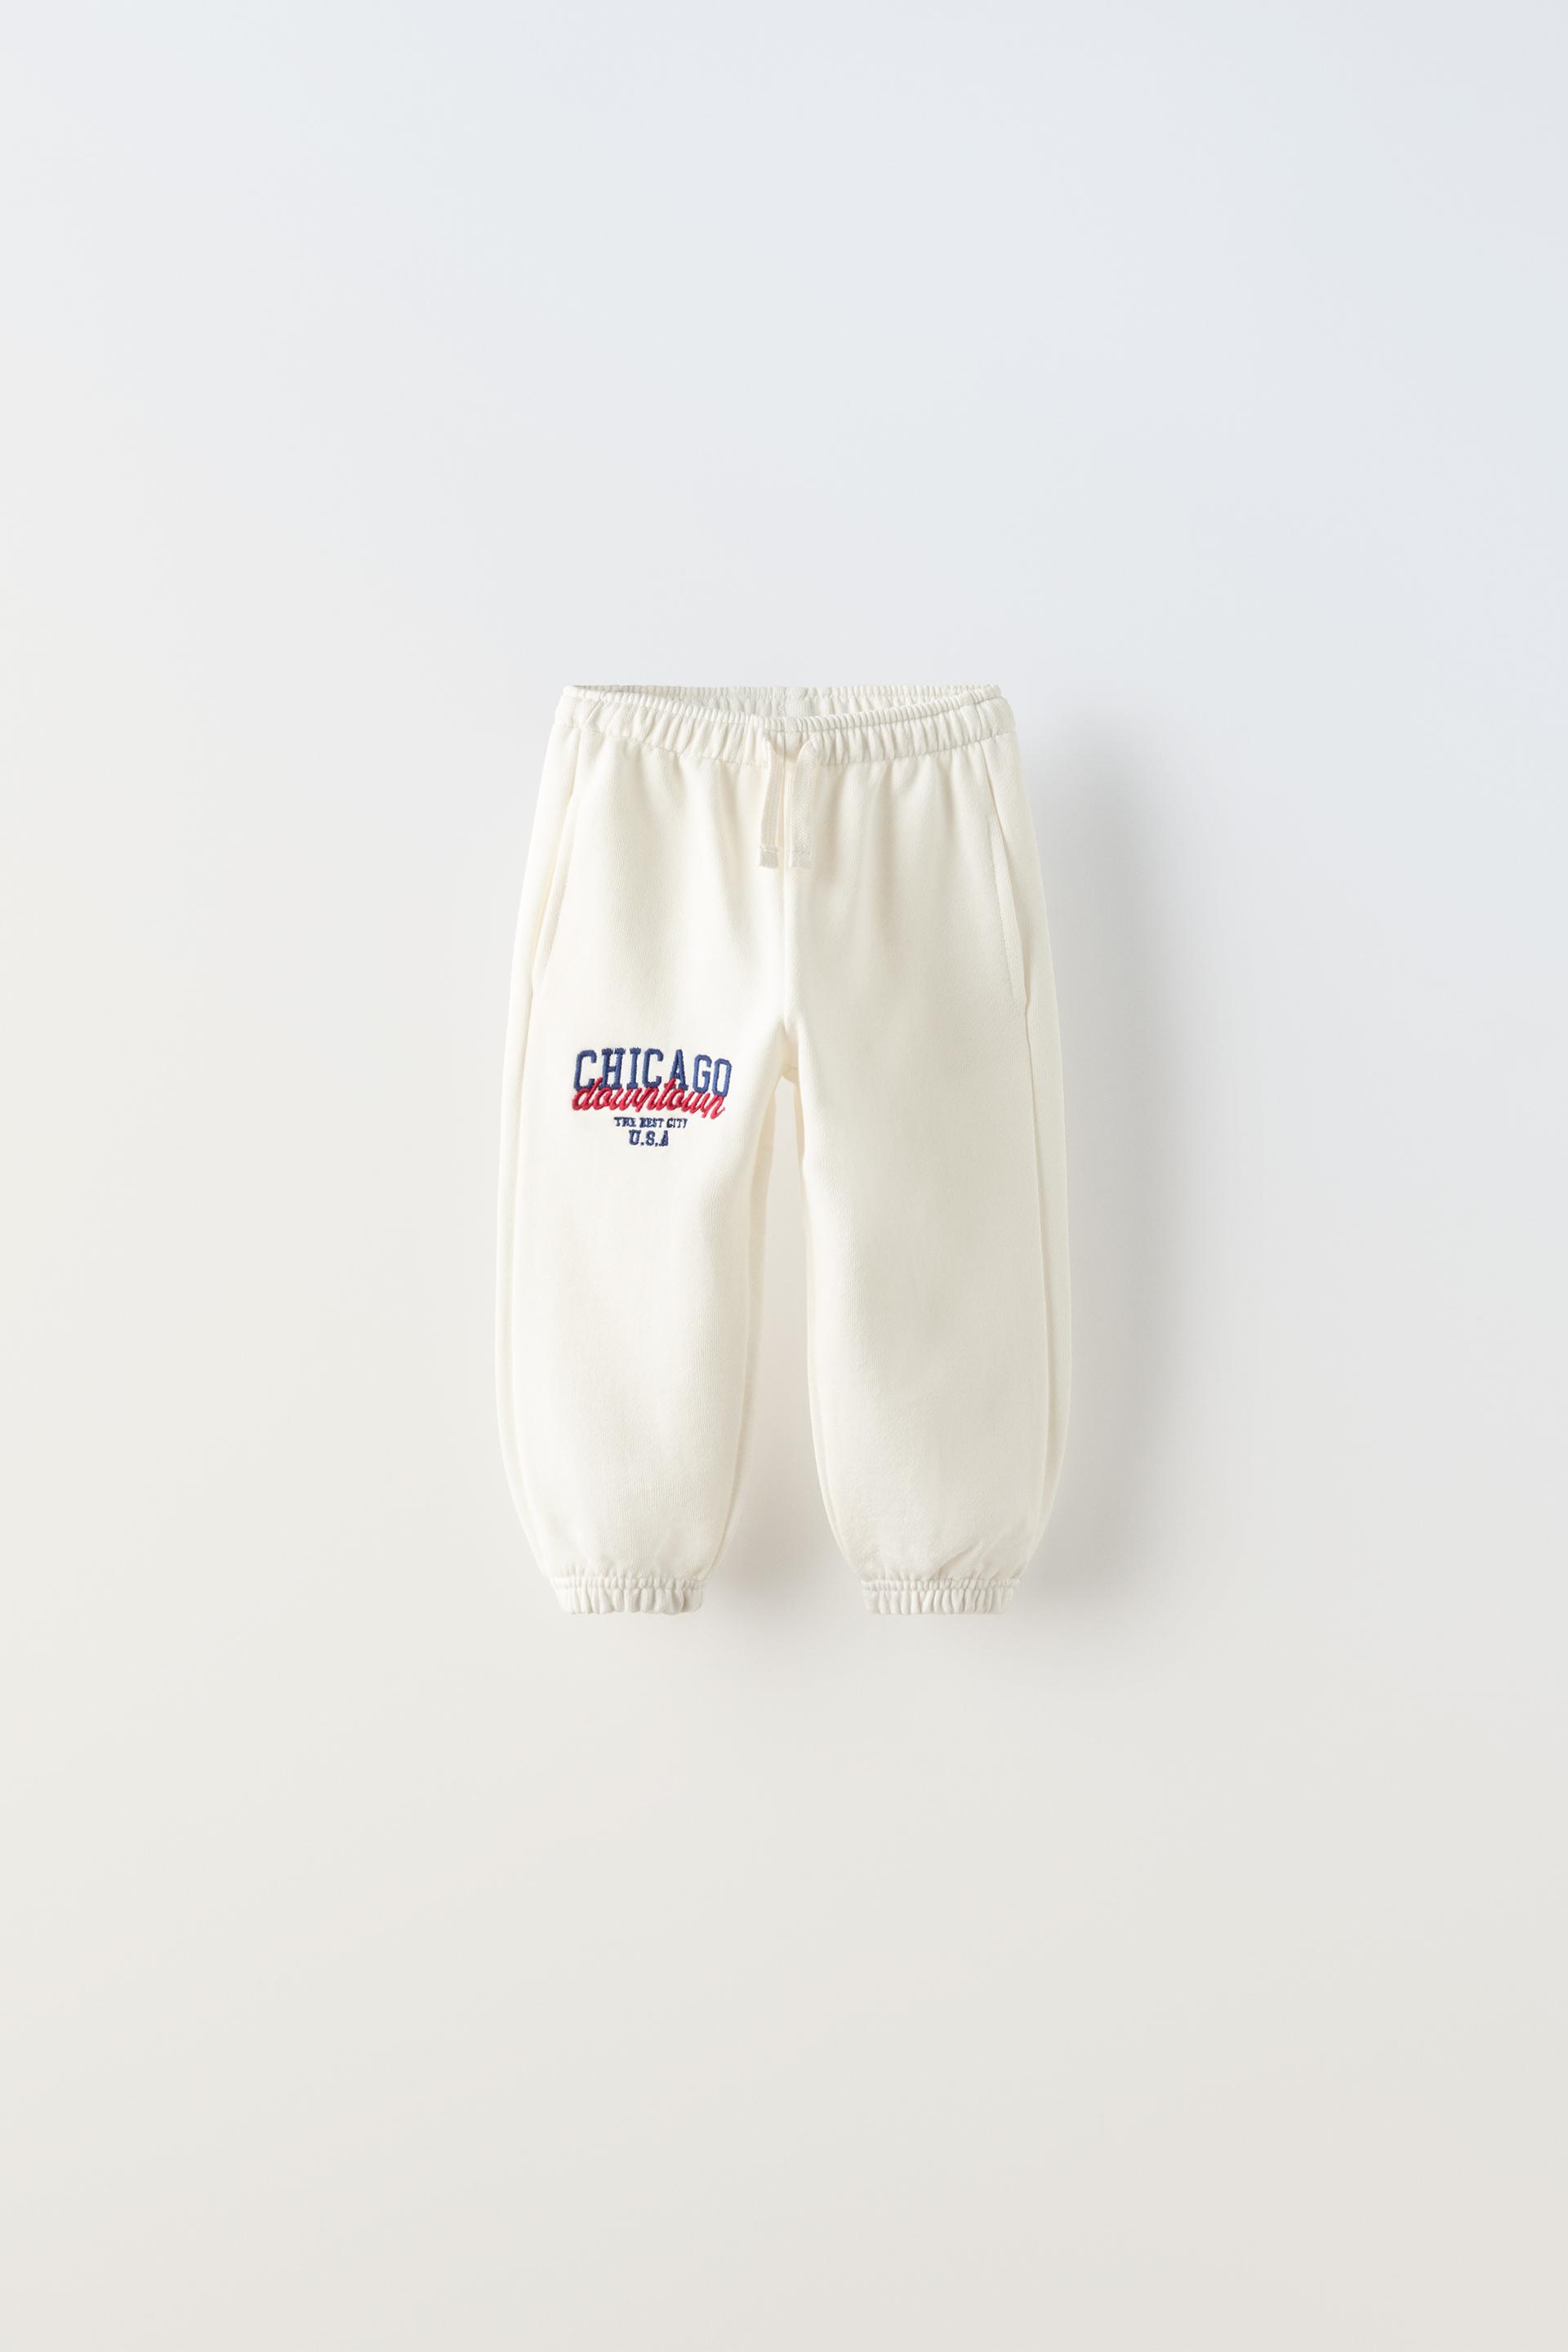 “CHICAGO” EMBROIDERED PANTS ZARA